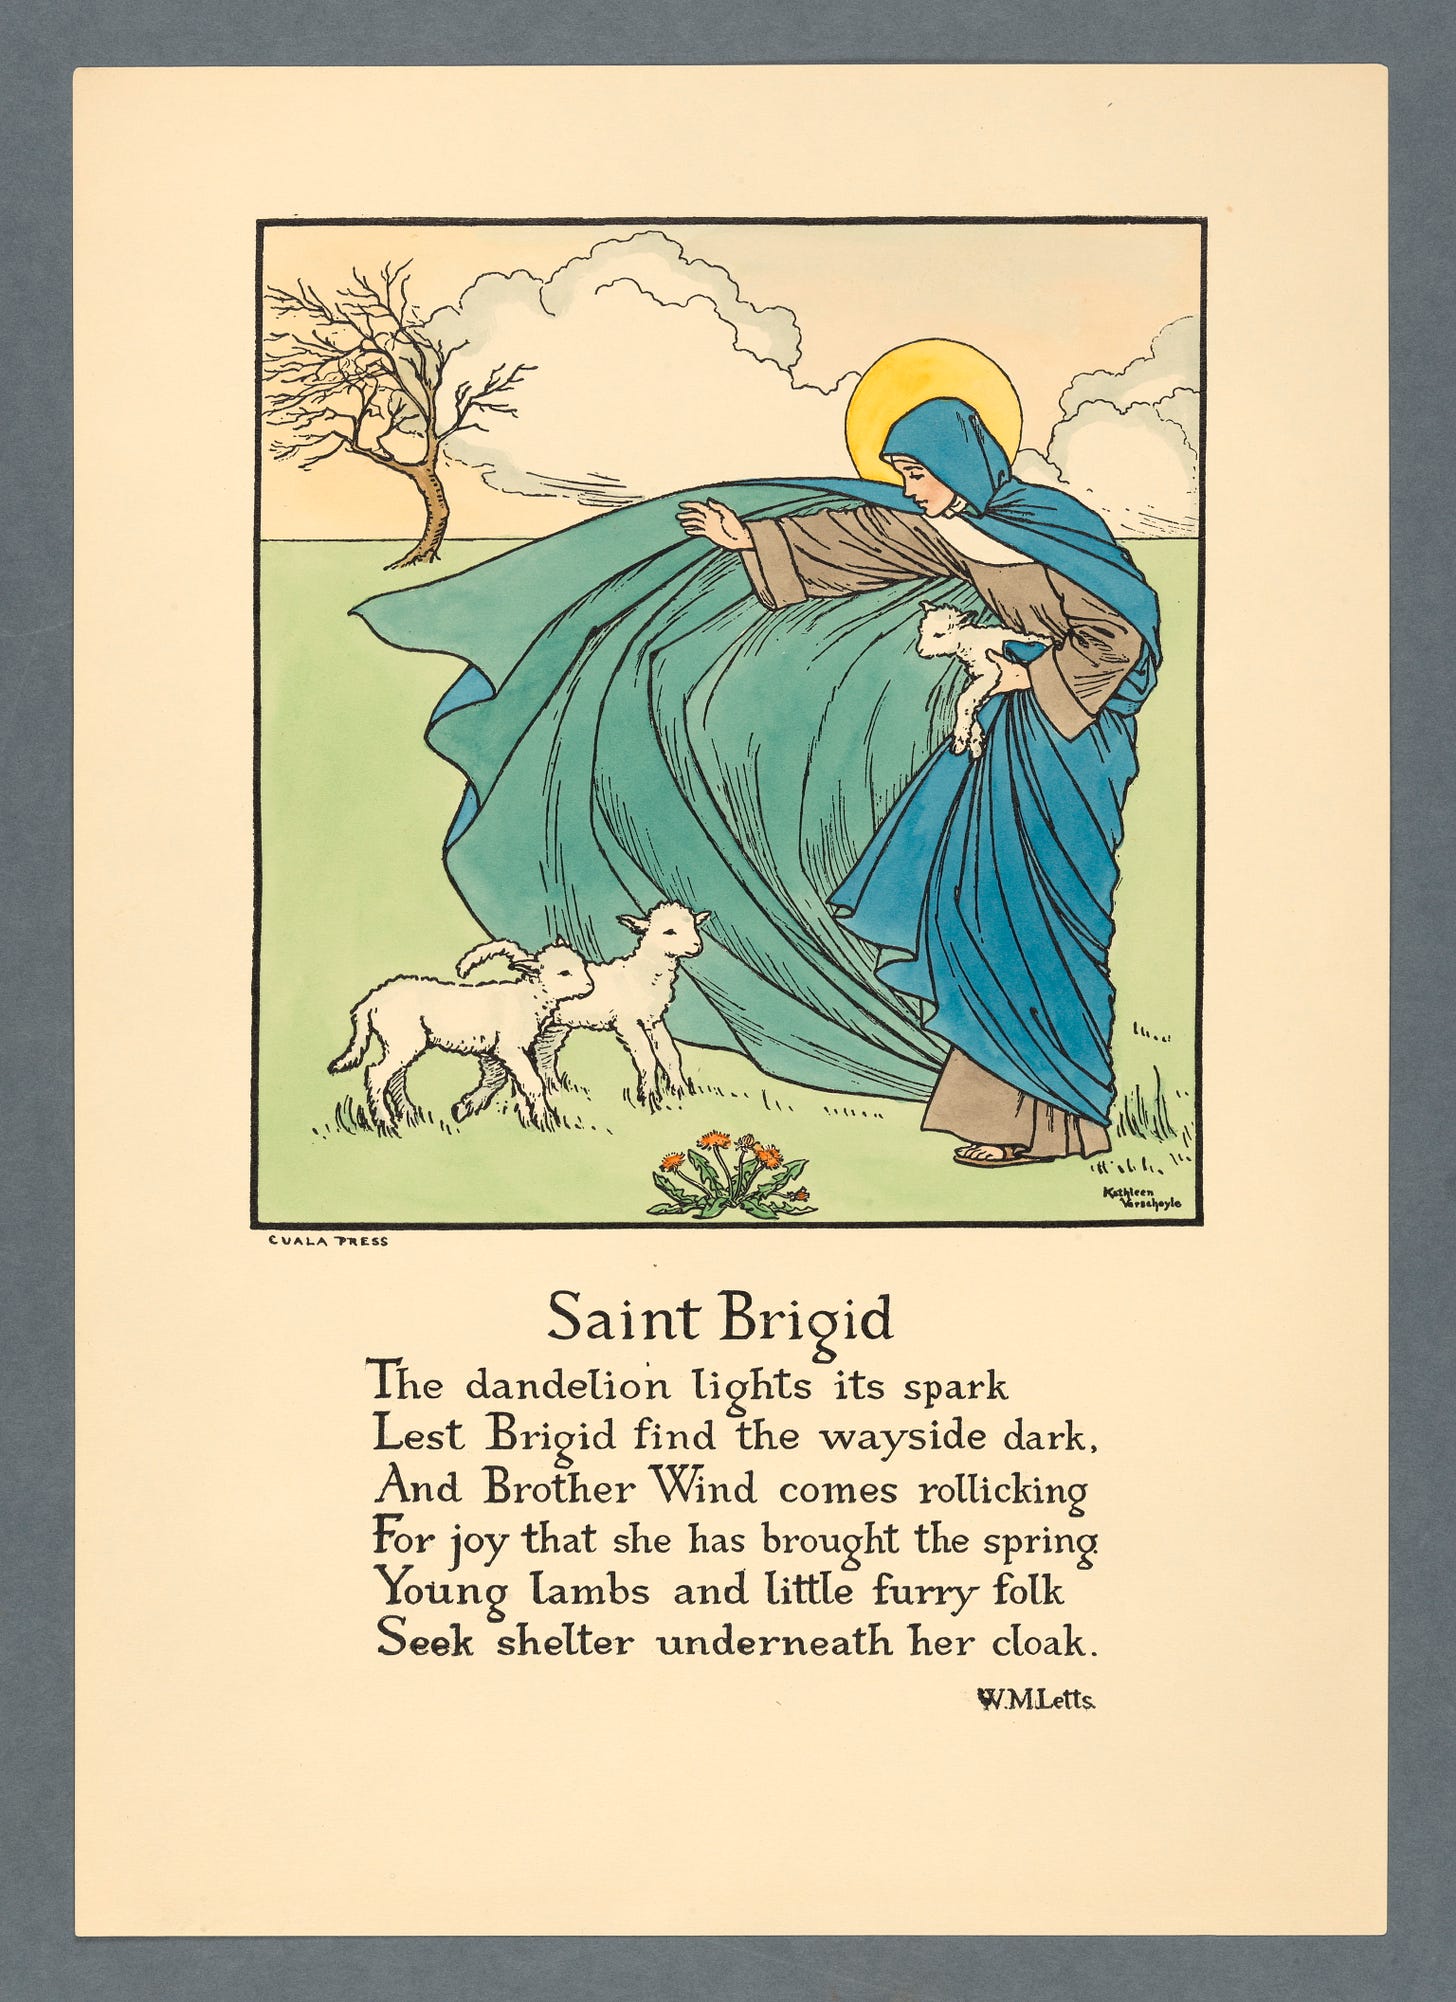 Saint Brigid feeding lambs with a dandelion in the foreground